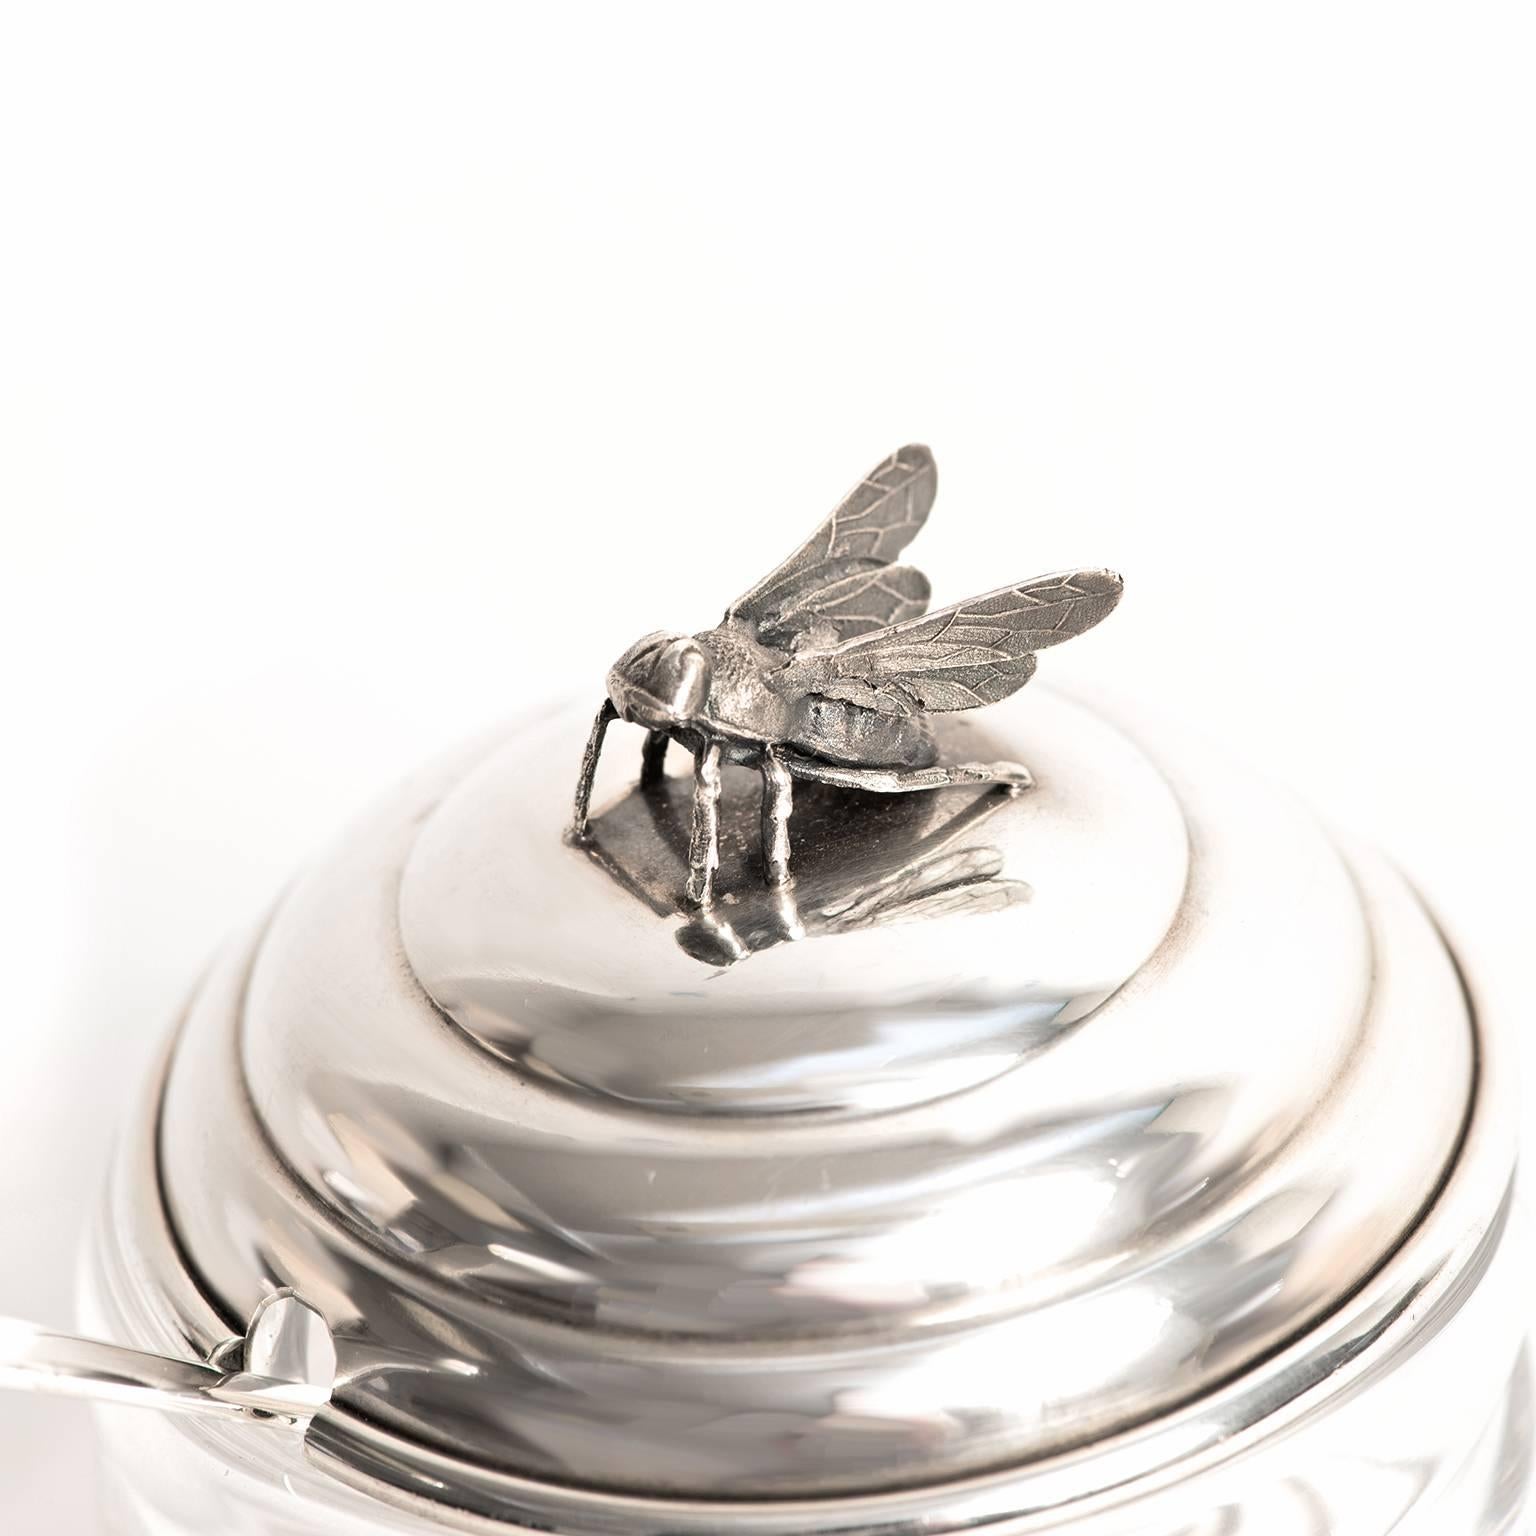 Circa 1920s, sterling, by Blackinton, American. An exquisitely detailed bee perches atop this delightfully figural honey jar. Filled with honey, this piece sets a charming table or will make a stellar hostess gift. Finely made by Blackinton, it is